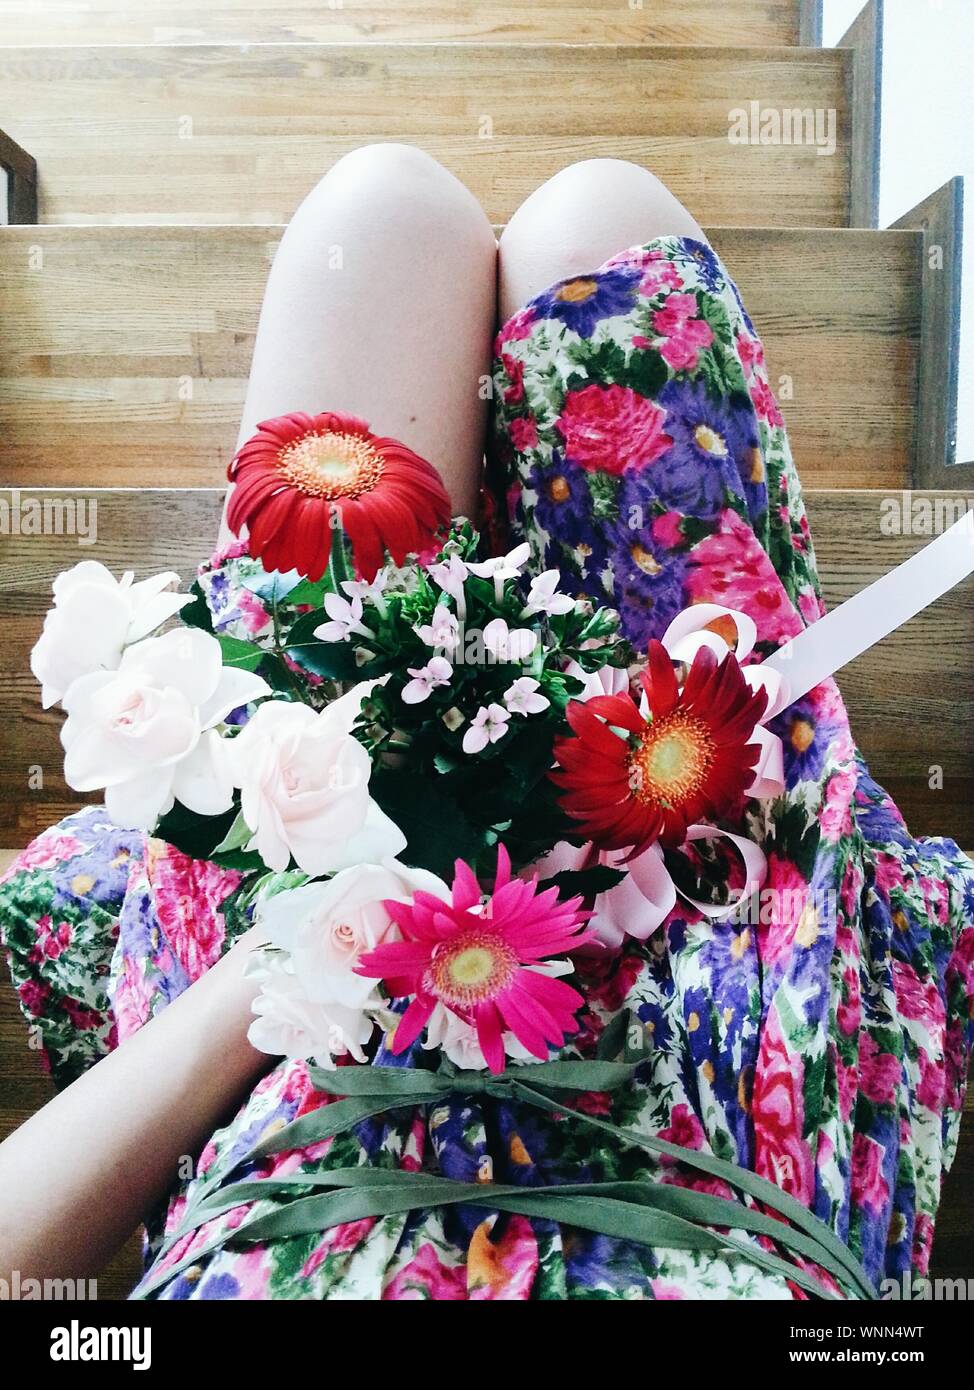 Low Section Of Woman Wearing Floral Dress Holding Flowers While Sitting On Steps Stock Photo